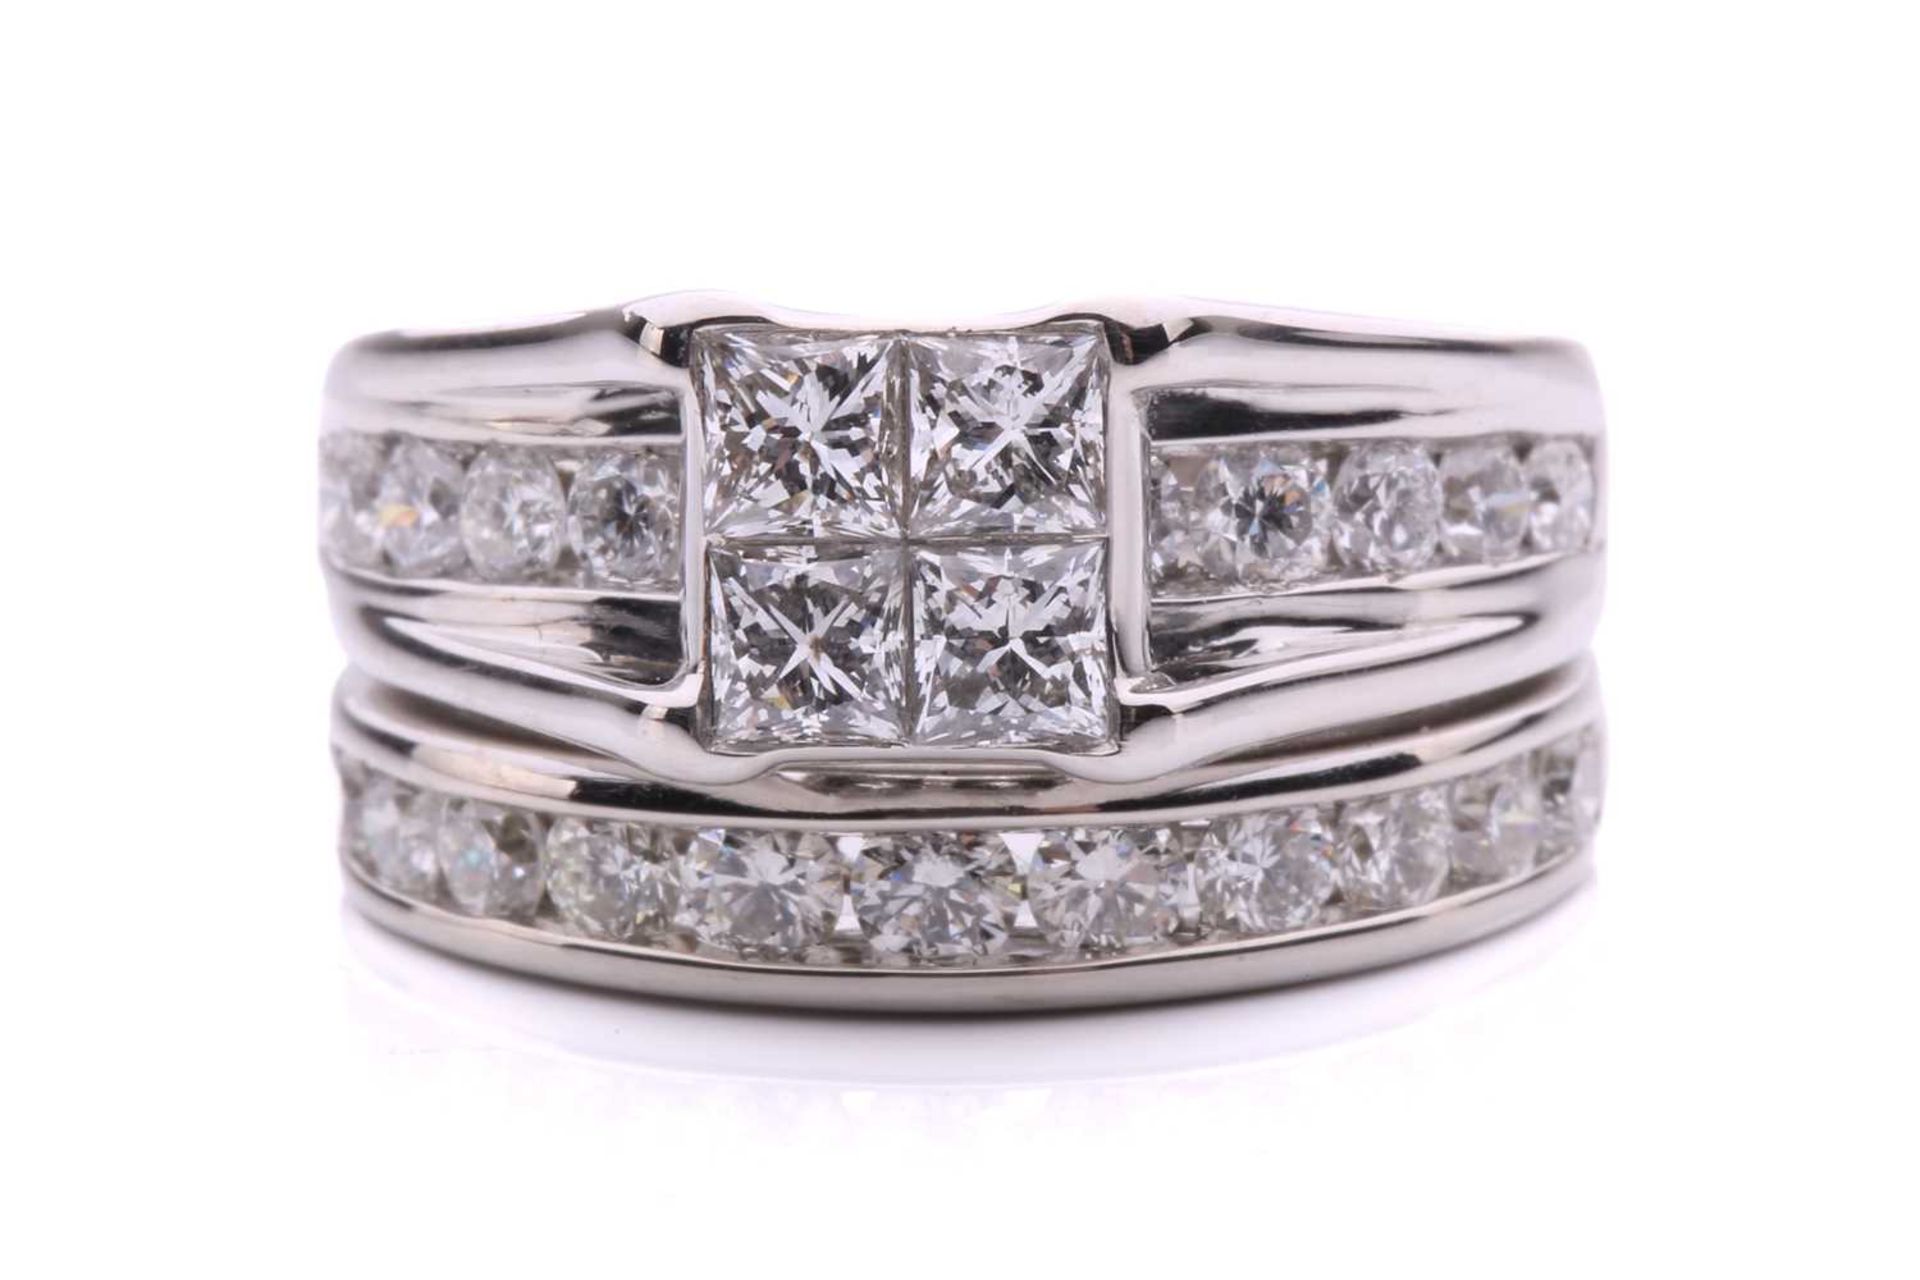 A diamond set bridal set rings, with 4 illusion set princess cut diamonds with an under hoop channel - Image 7 of 8